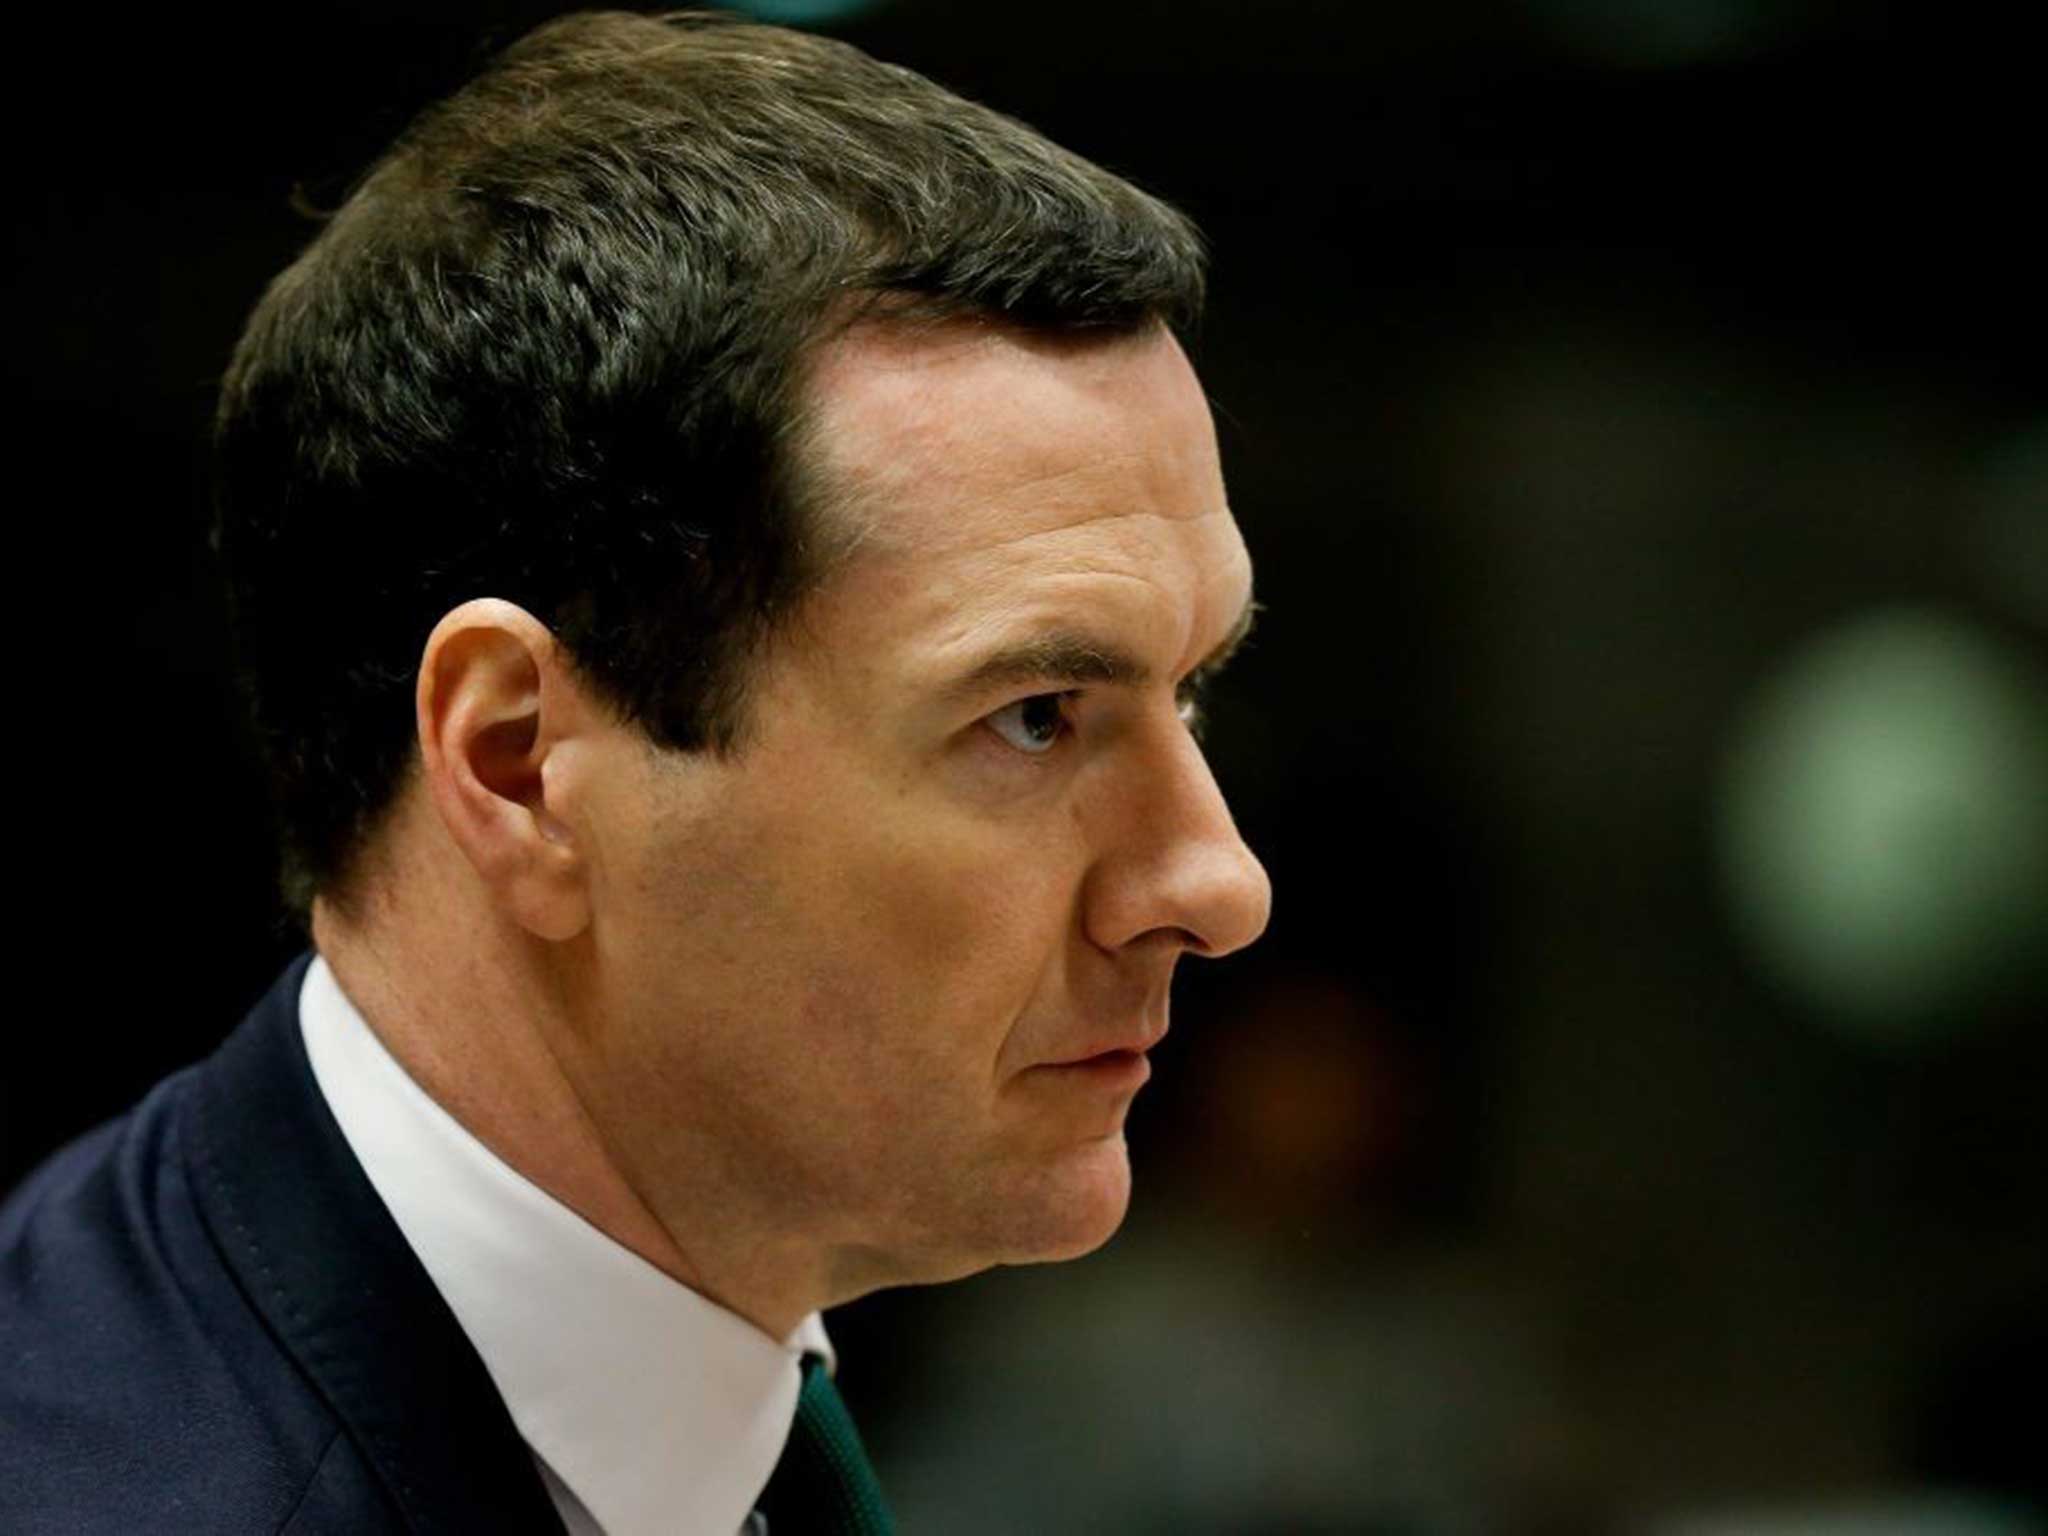 Osborne will announce changes to how northern English cities are run